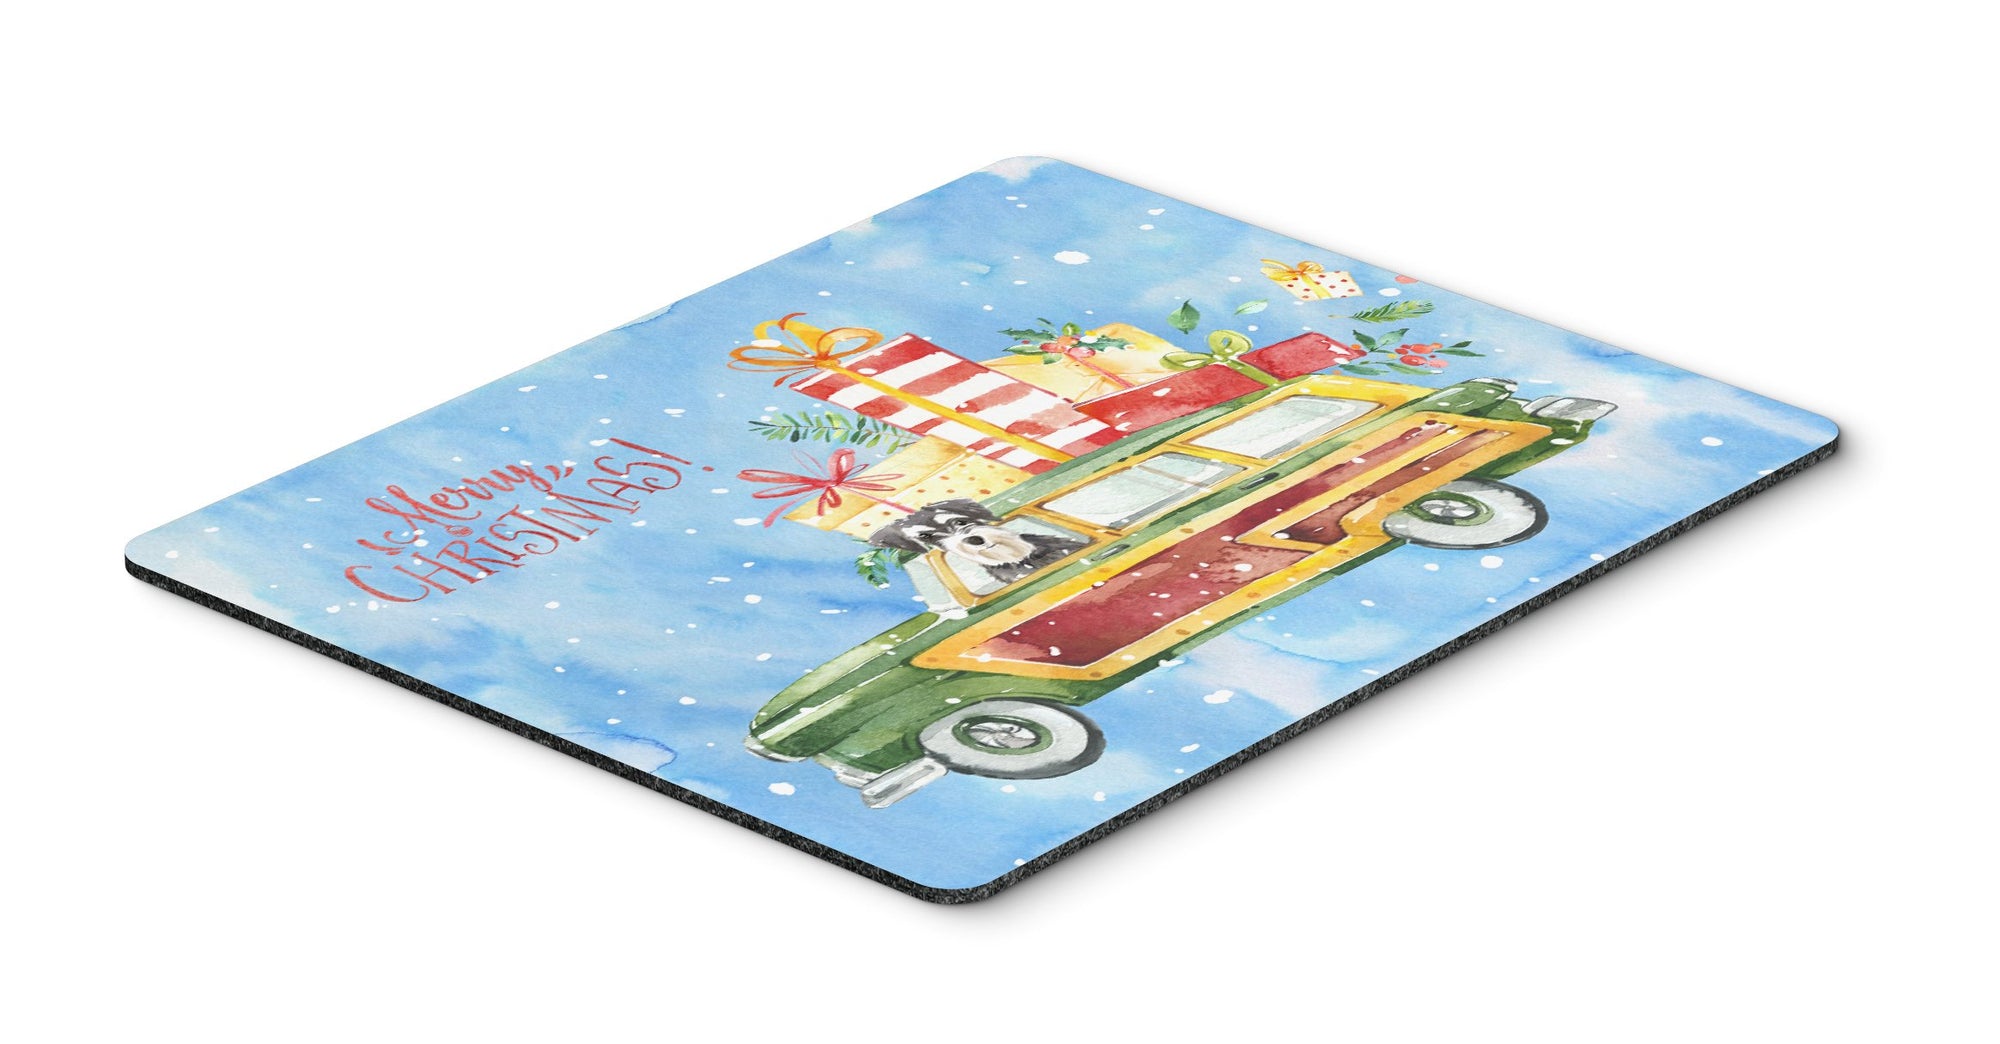 Merry Christmas Schnauzer Mouse Pad, Hot Pad or Trivet CK2415MP by Caroline's Treasures